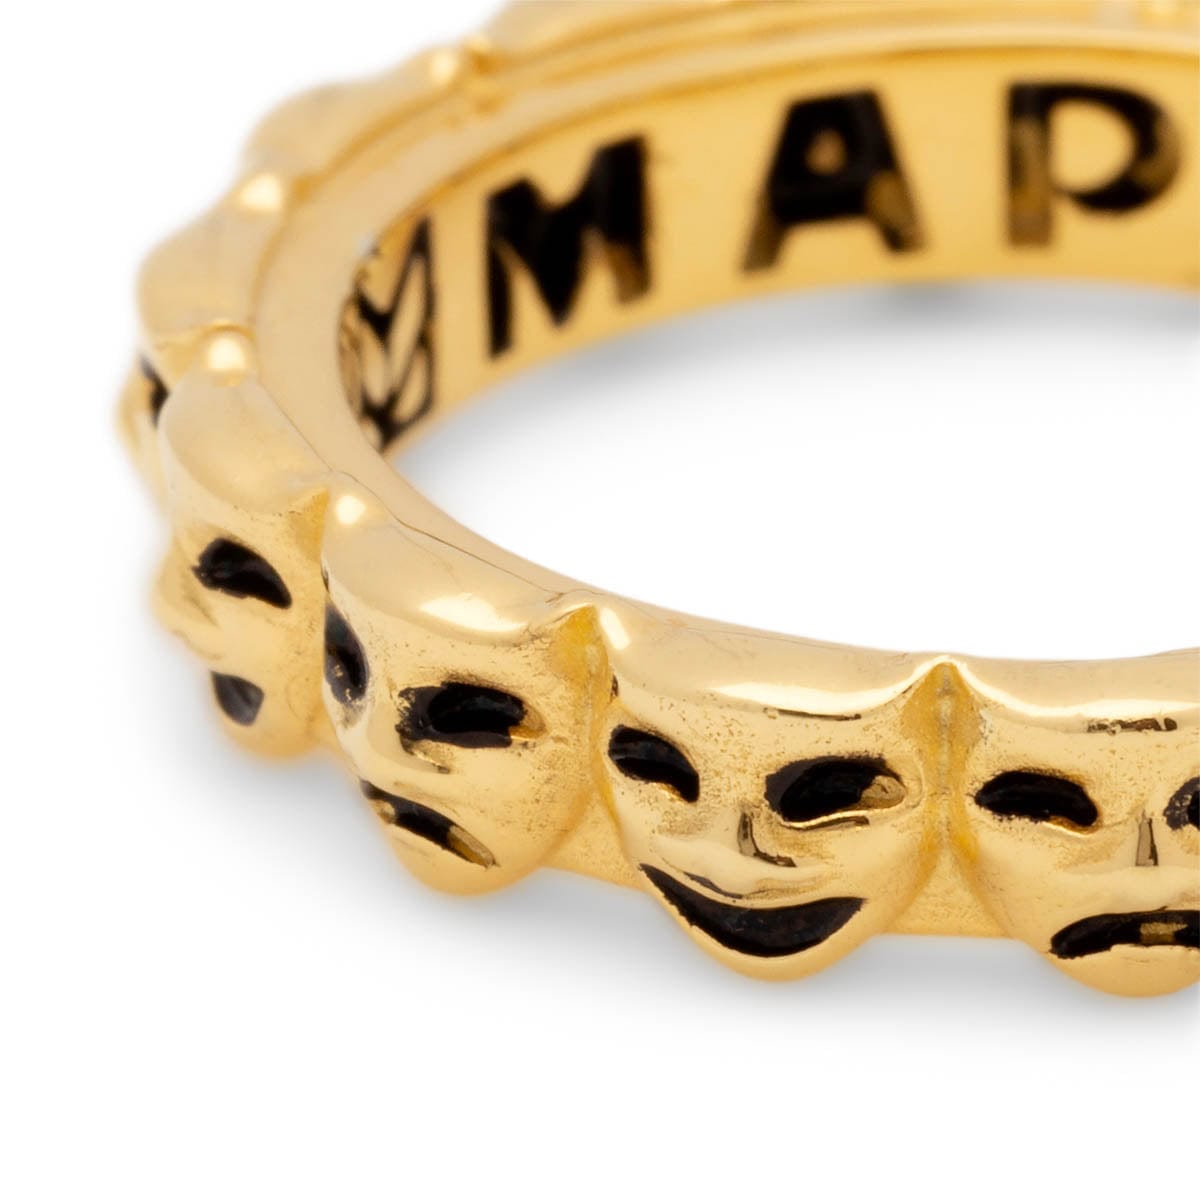 Maple Jewelry LAUGH NOW CRY LATER RING